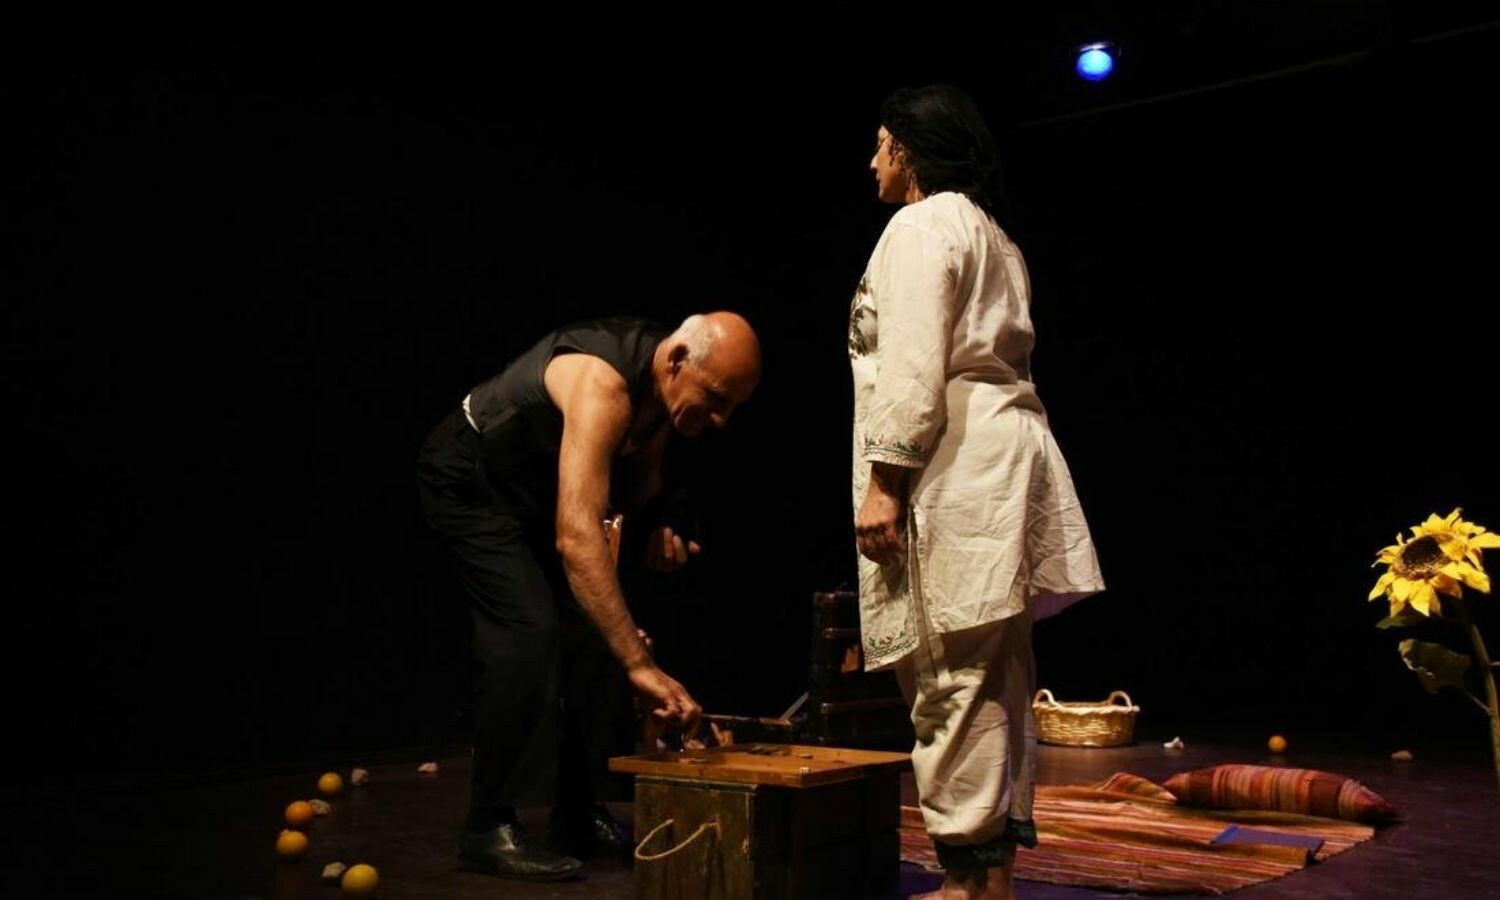 A man on the left bending down to pick things off a stool and a woman on the right standing up straight and looking down at him.